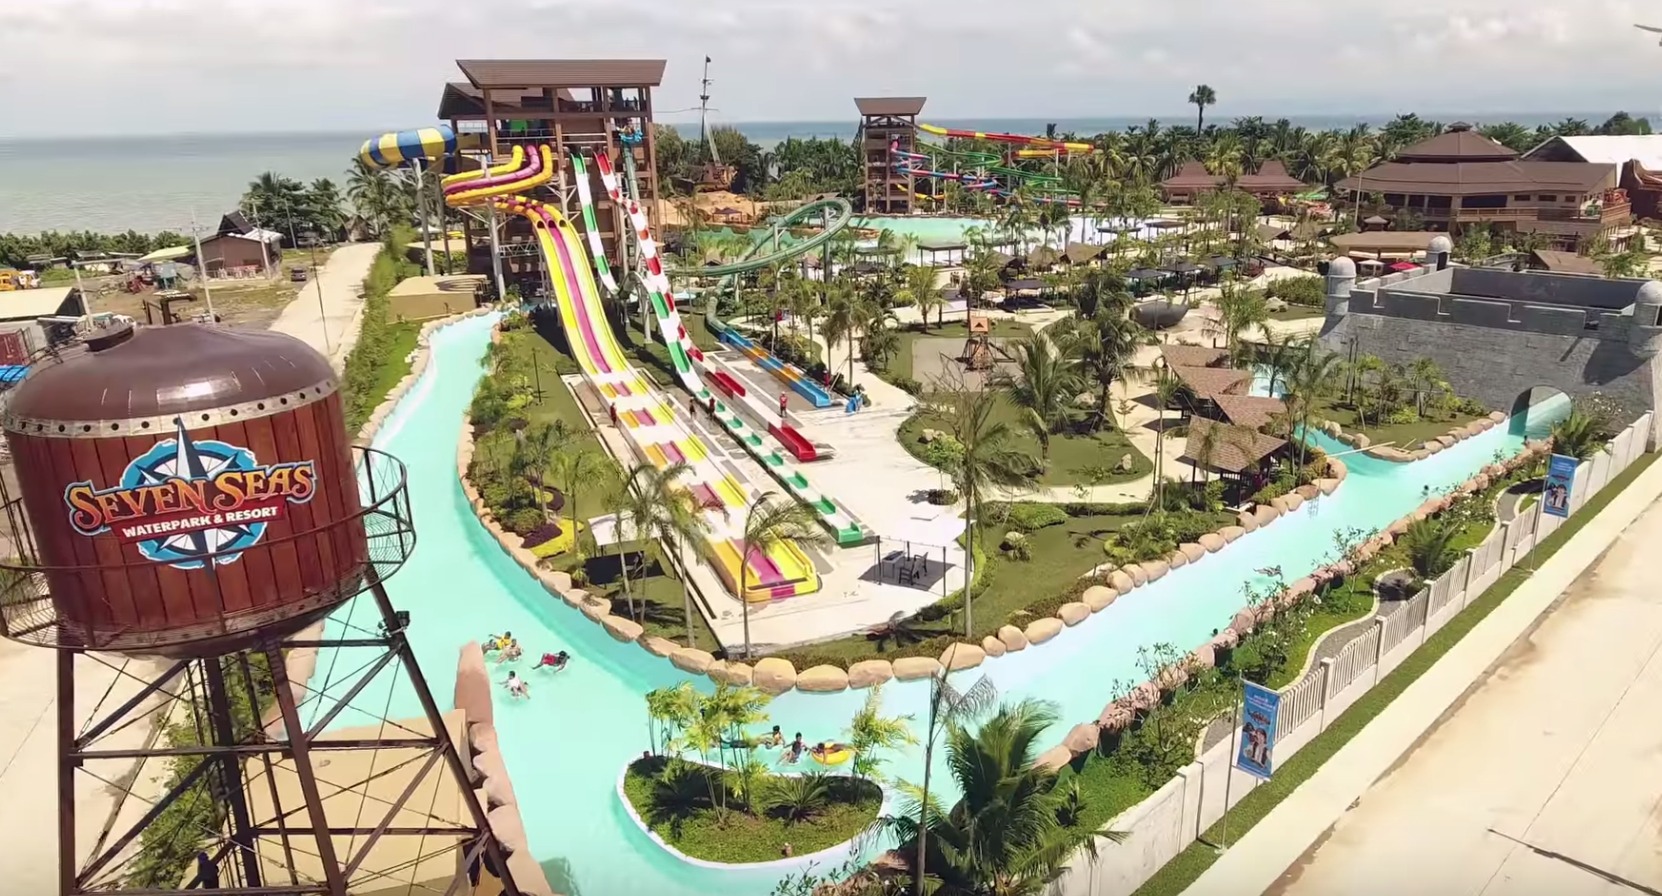 20 Slides In This New Waterpark